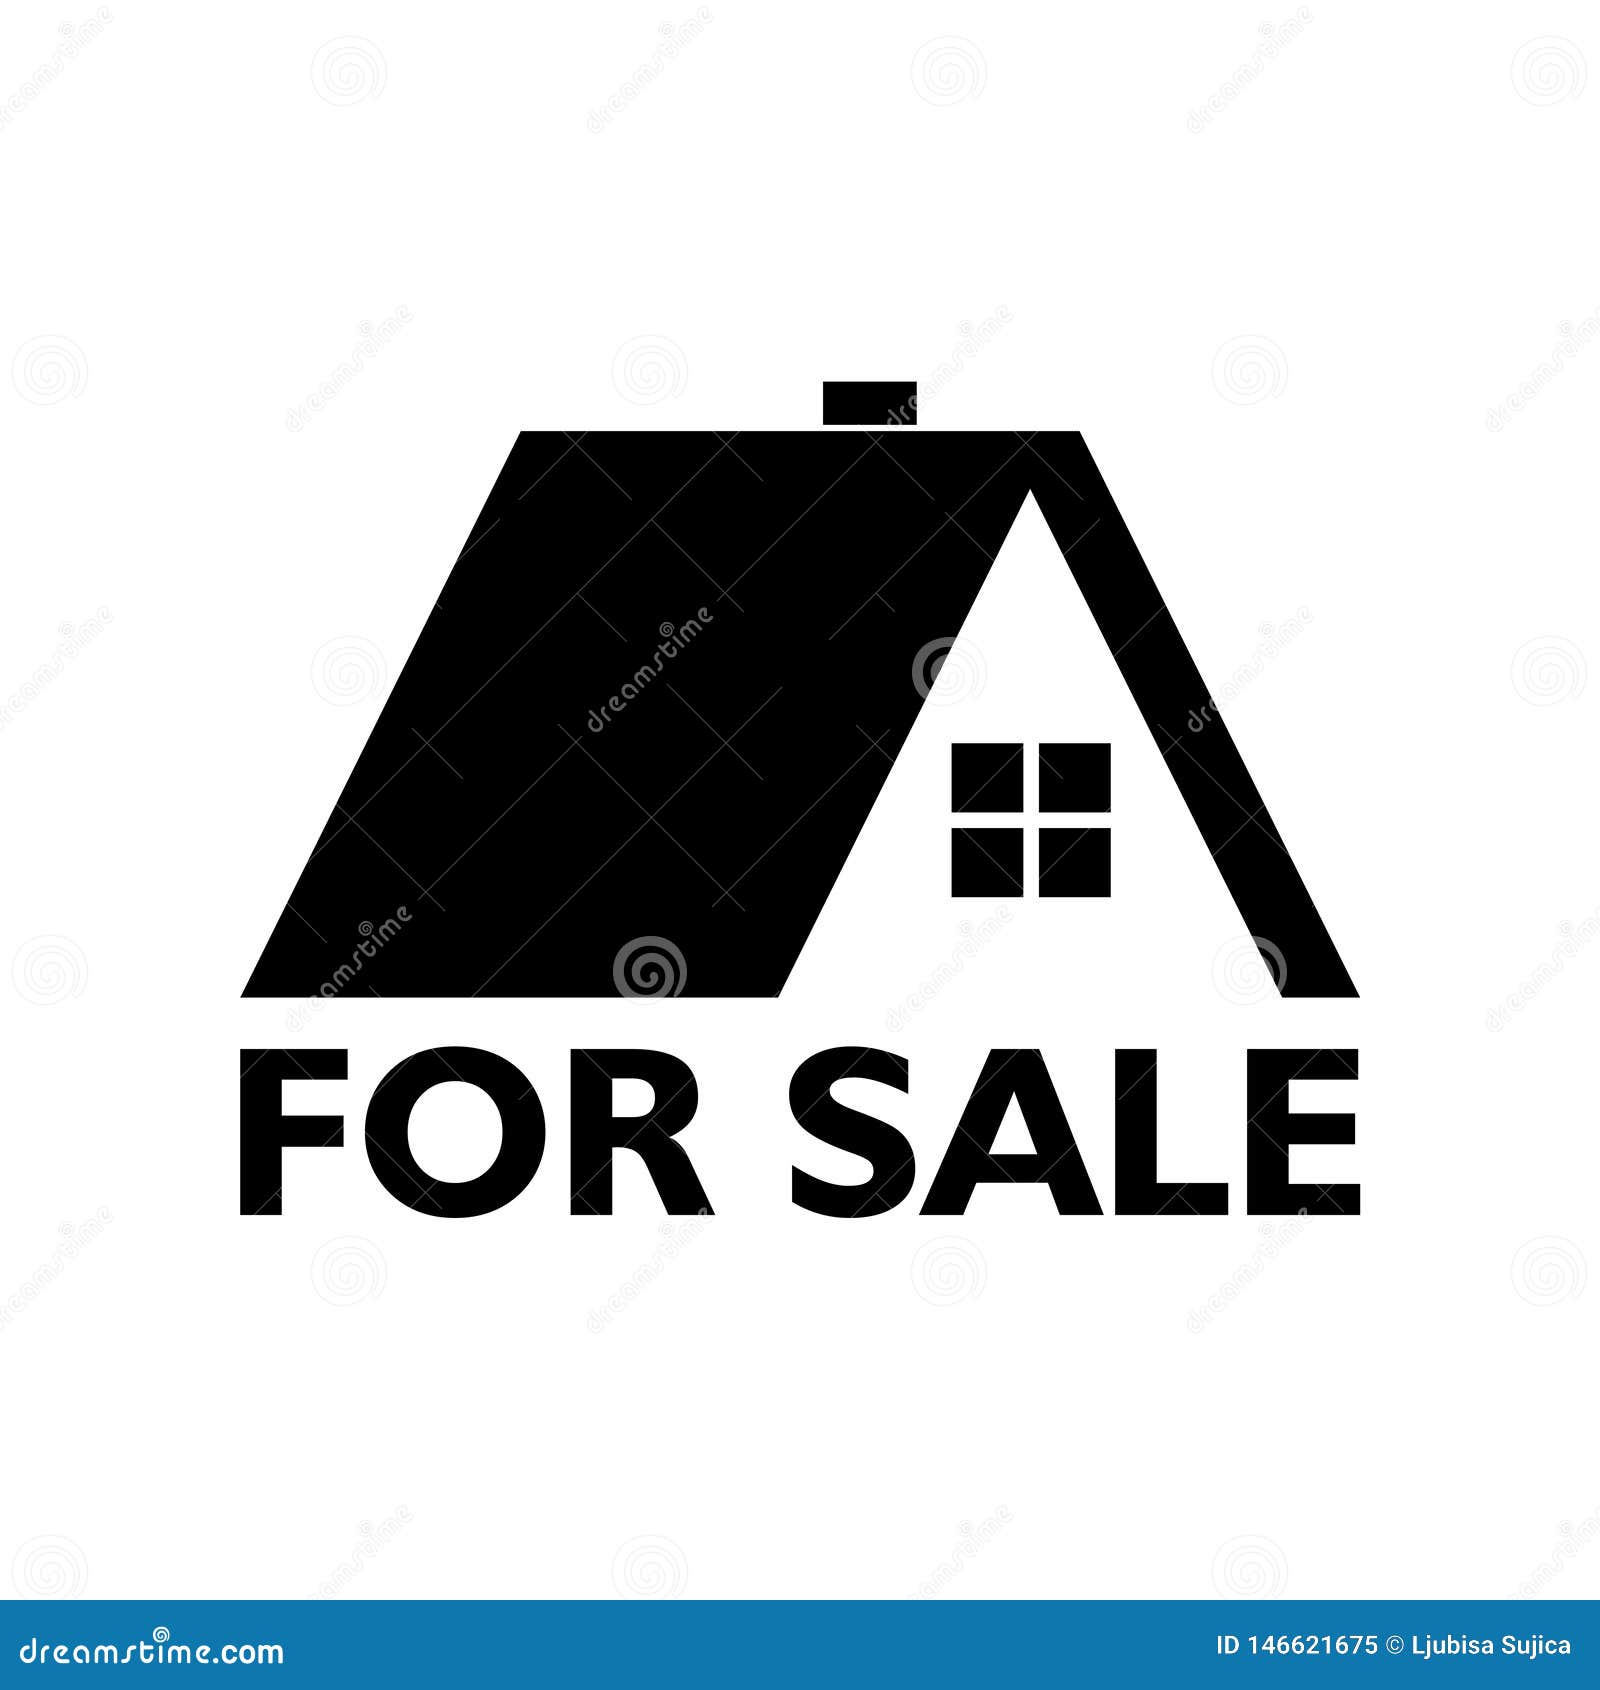 house for sale icon or sign